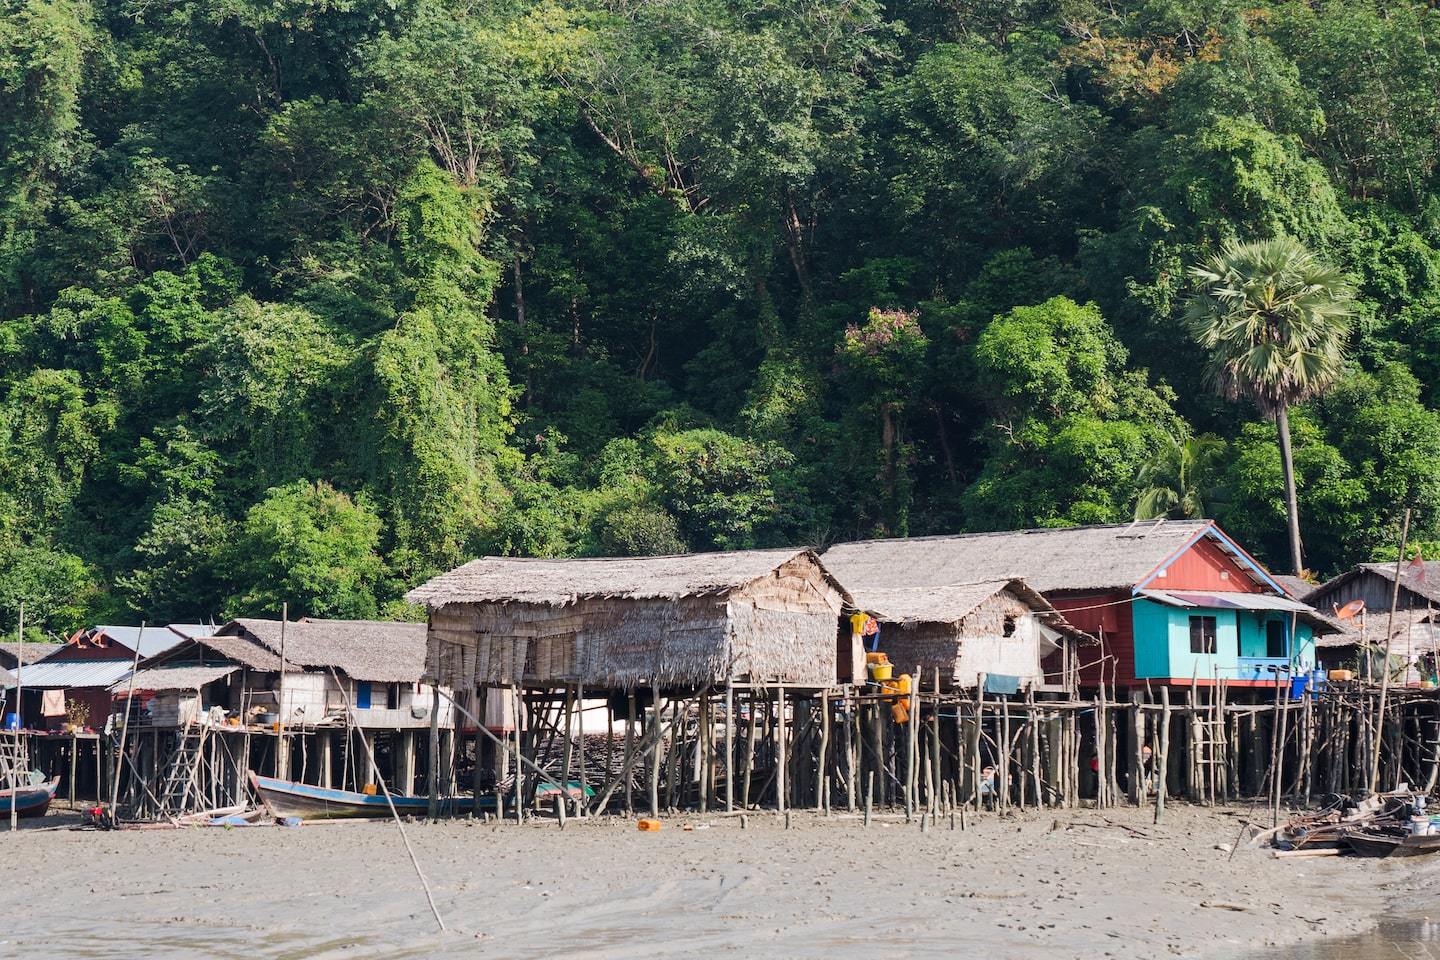 wooden houses on stilts on the beach in front of a forest